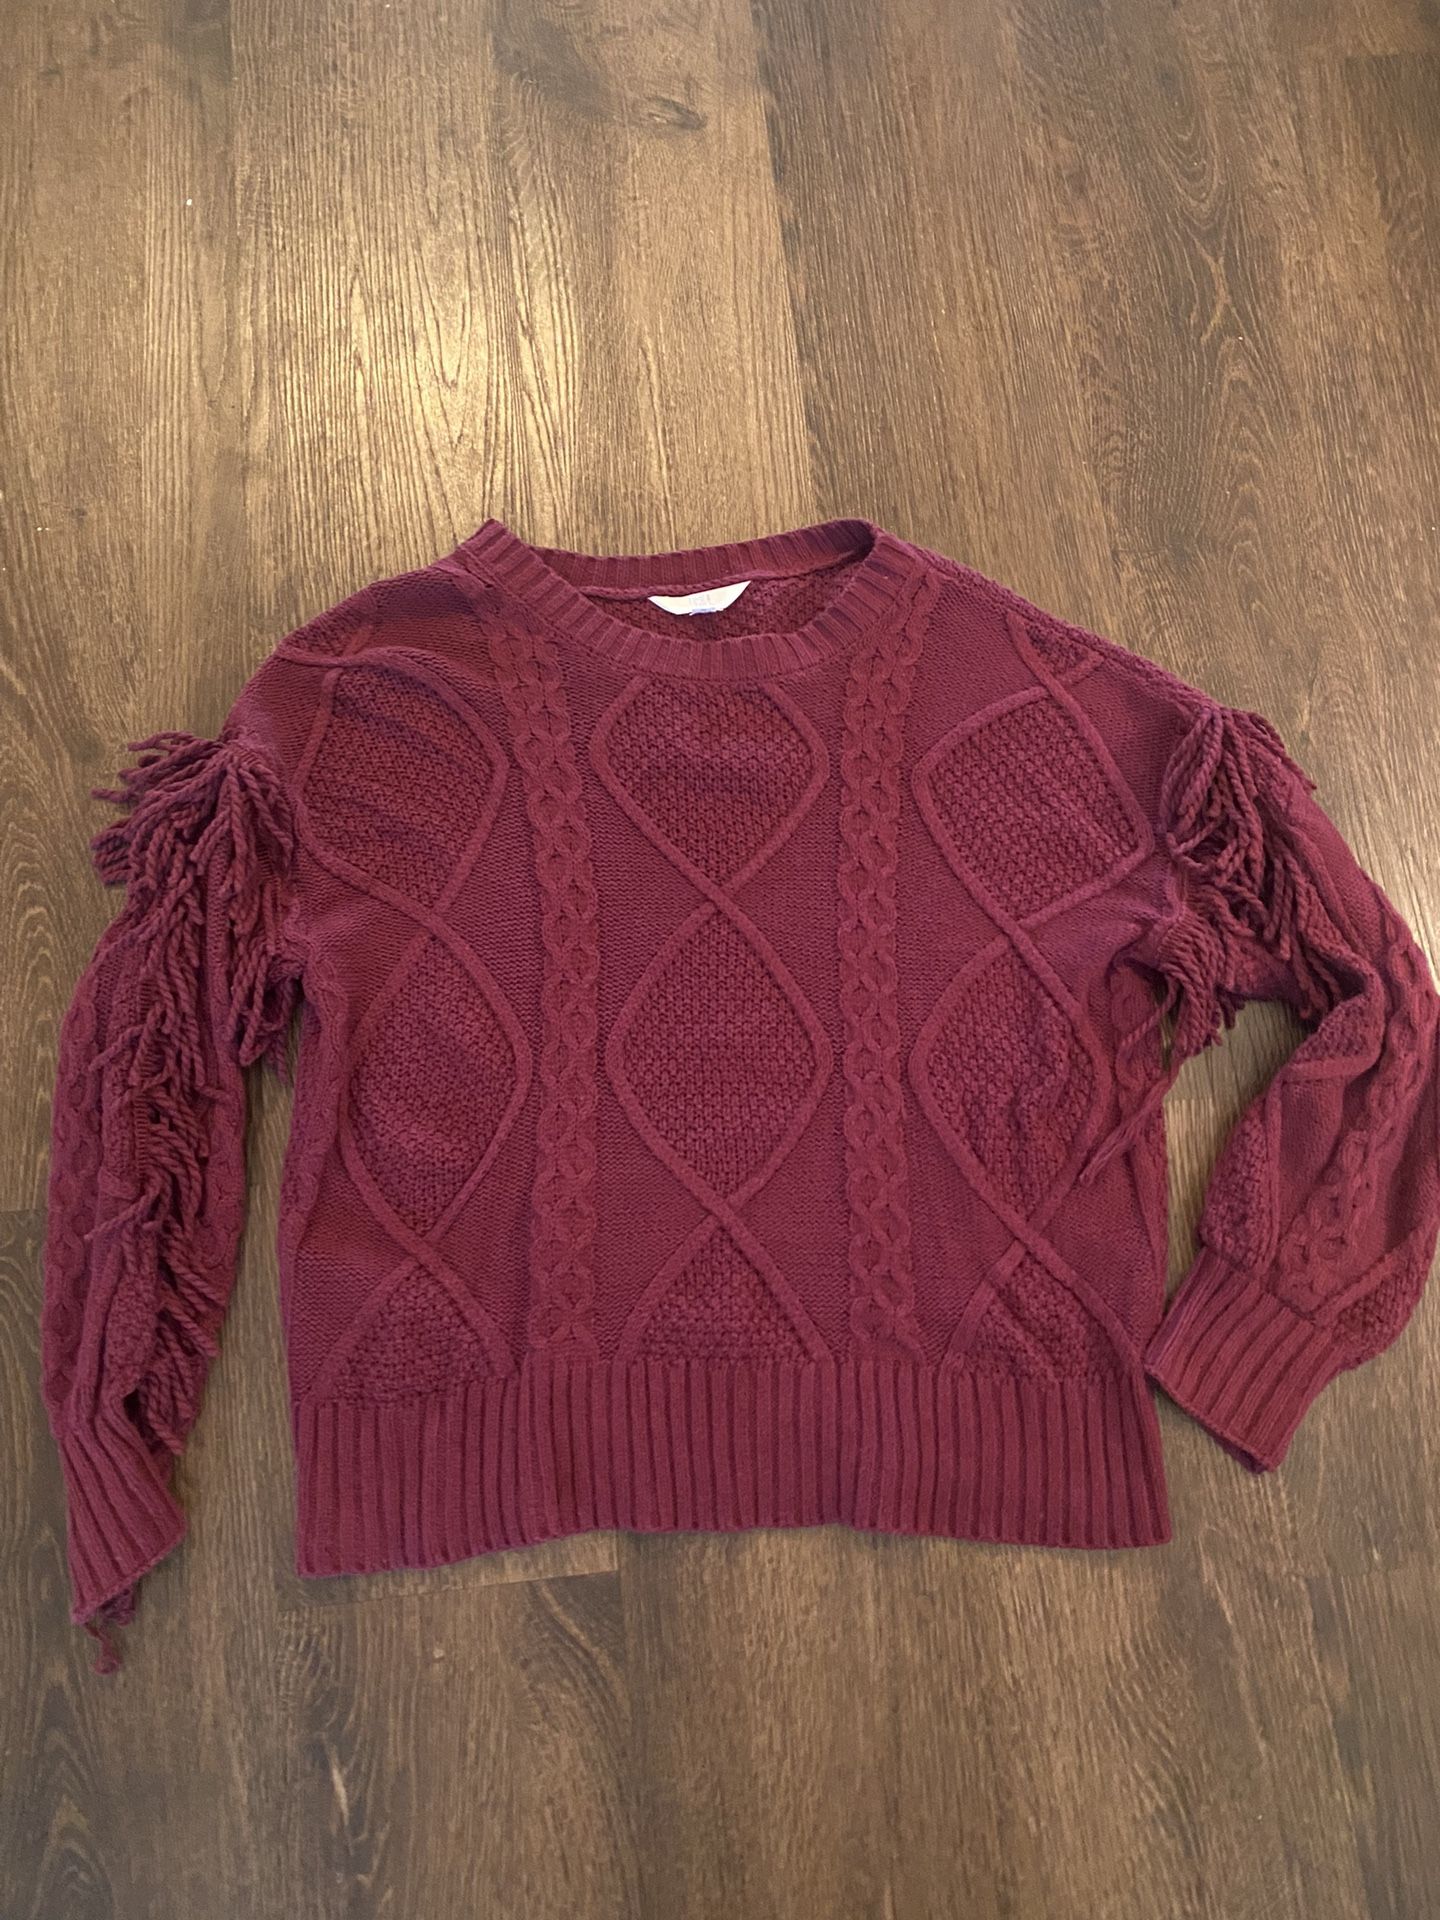 Womans Eggplant Purple Fringe Sweater Size Medium By Time And Tru #2